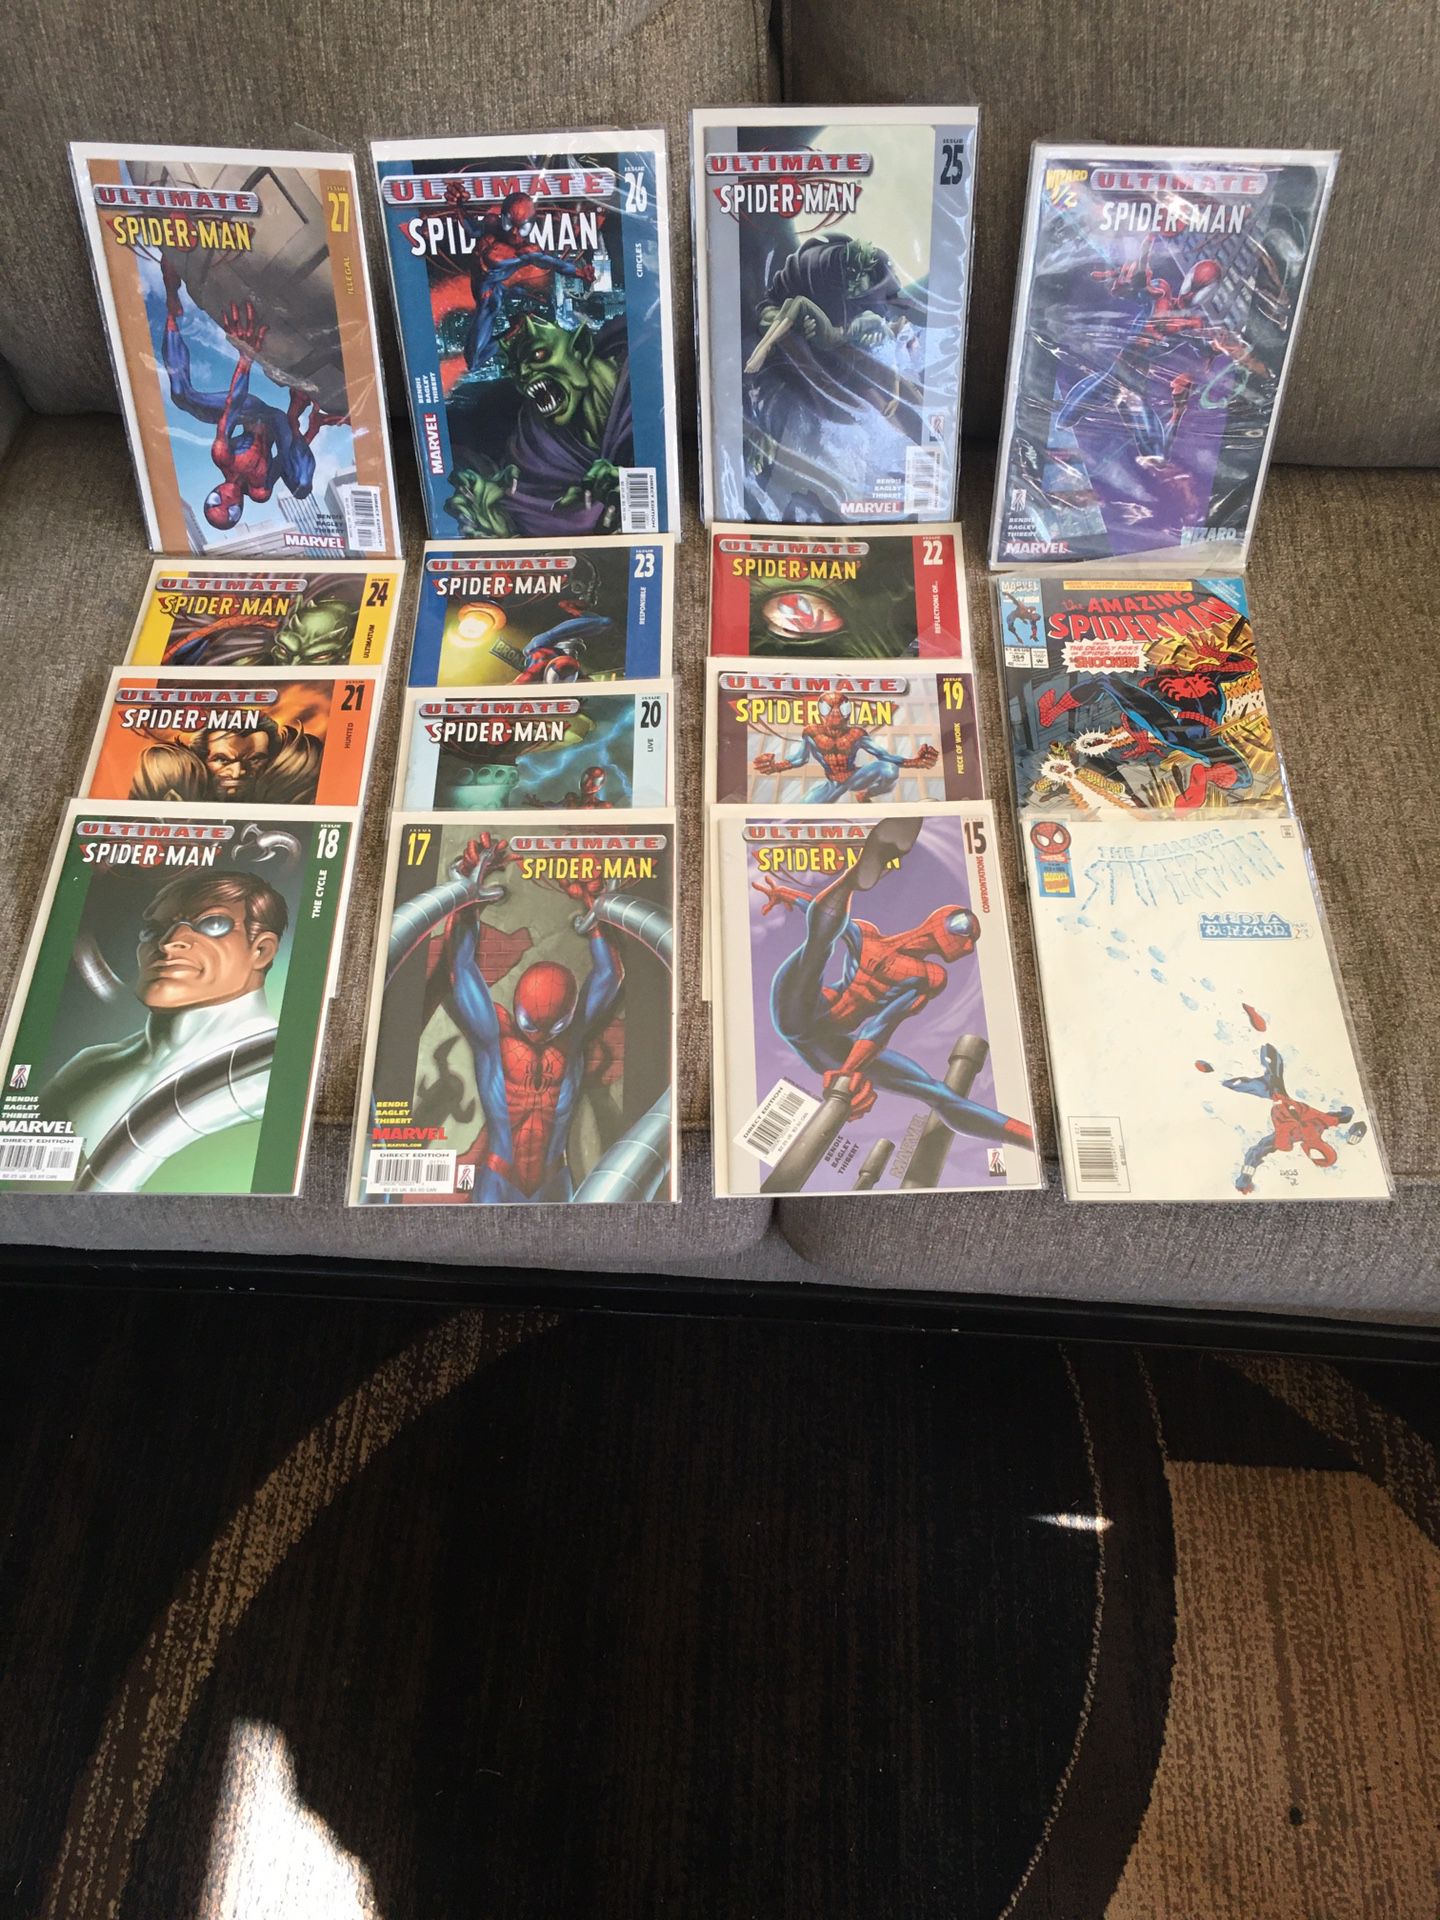 Spiderman comic books 15 pieces five dollars each or $60 for all, like new in plastic